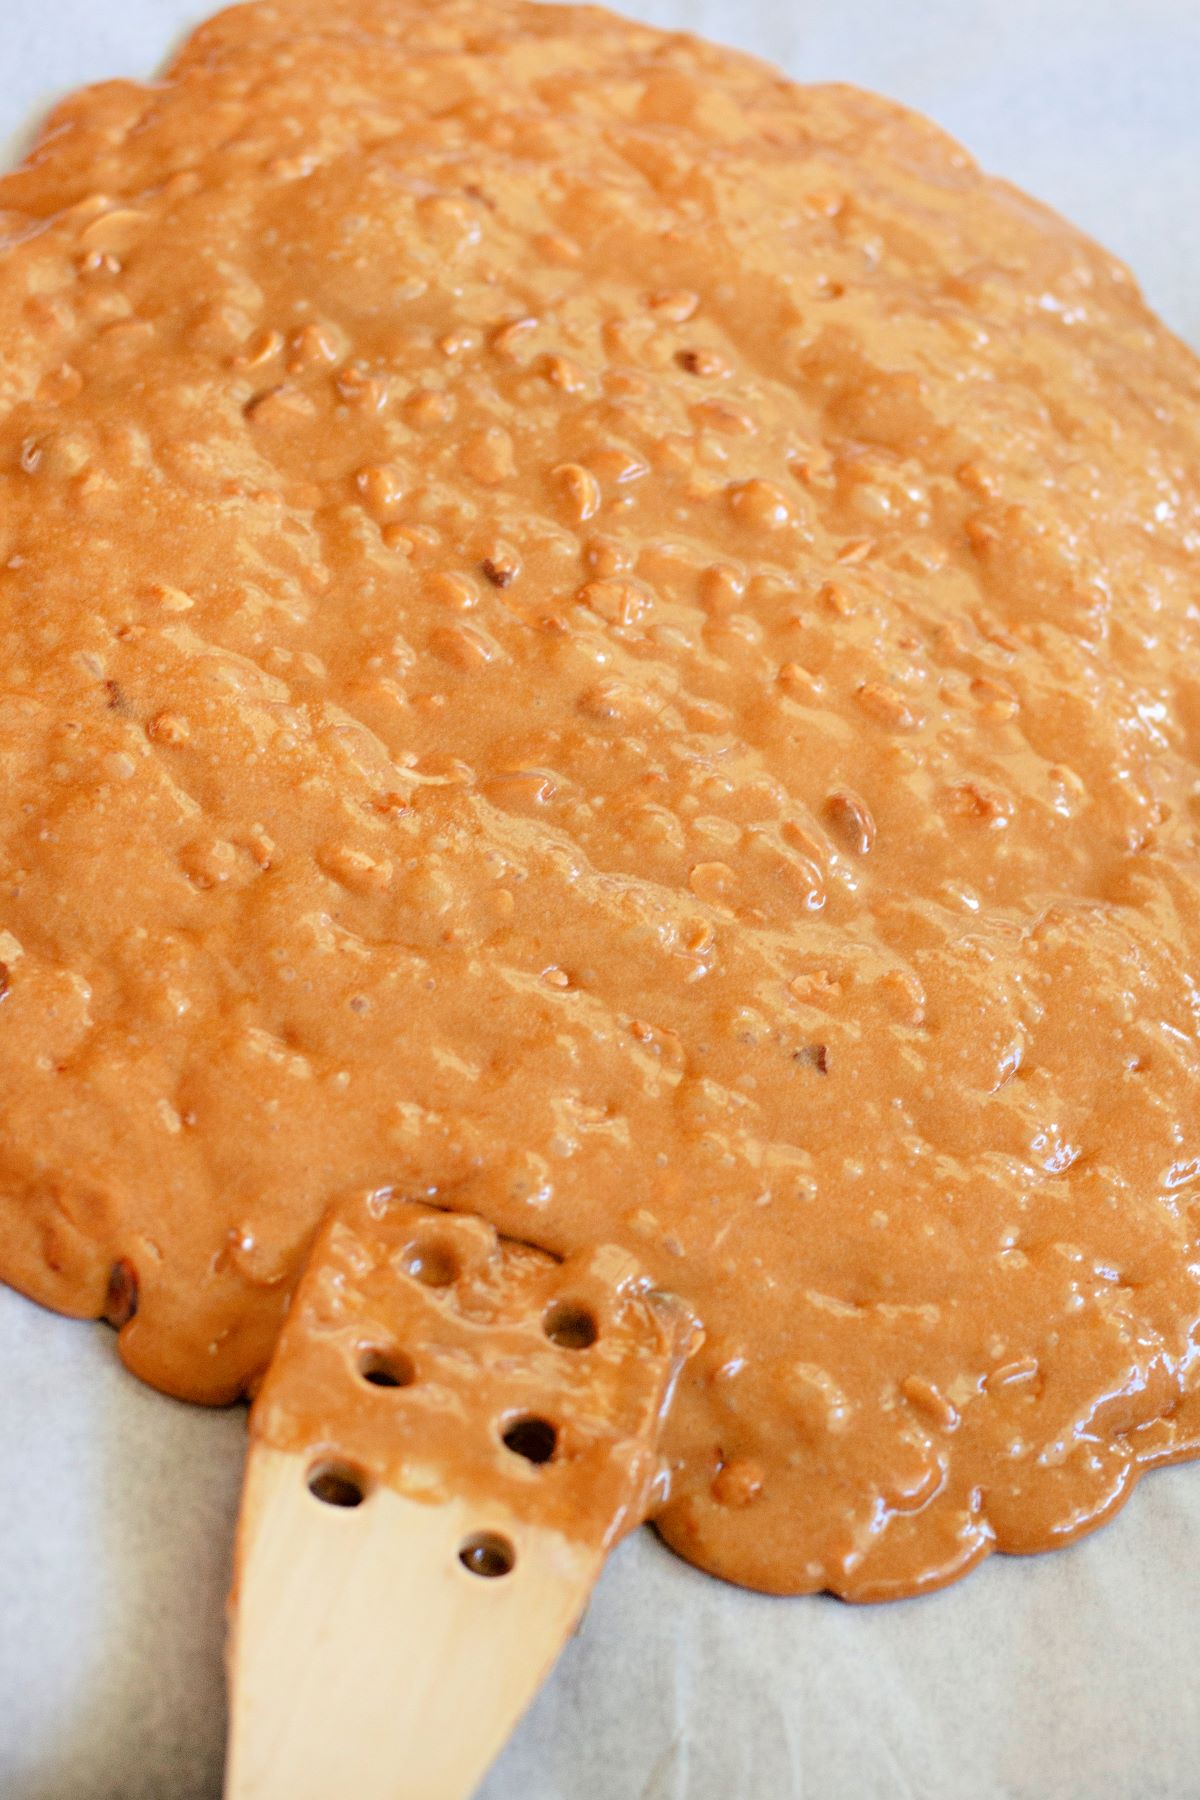 spreading the hot peanut brittle out onto a cookie sheet.